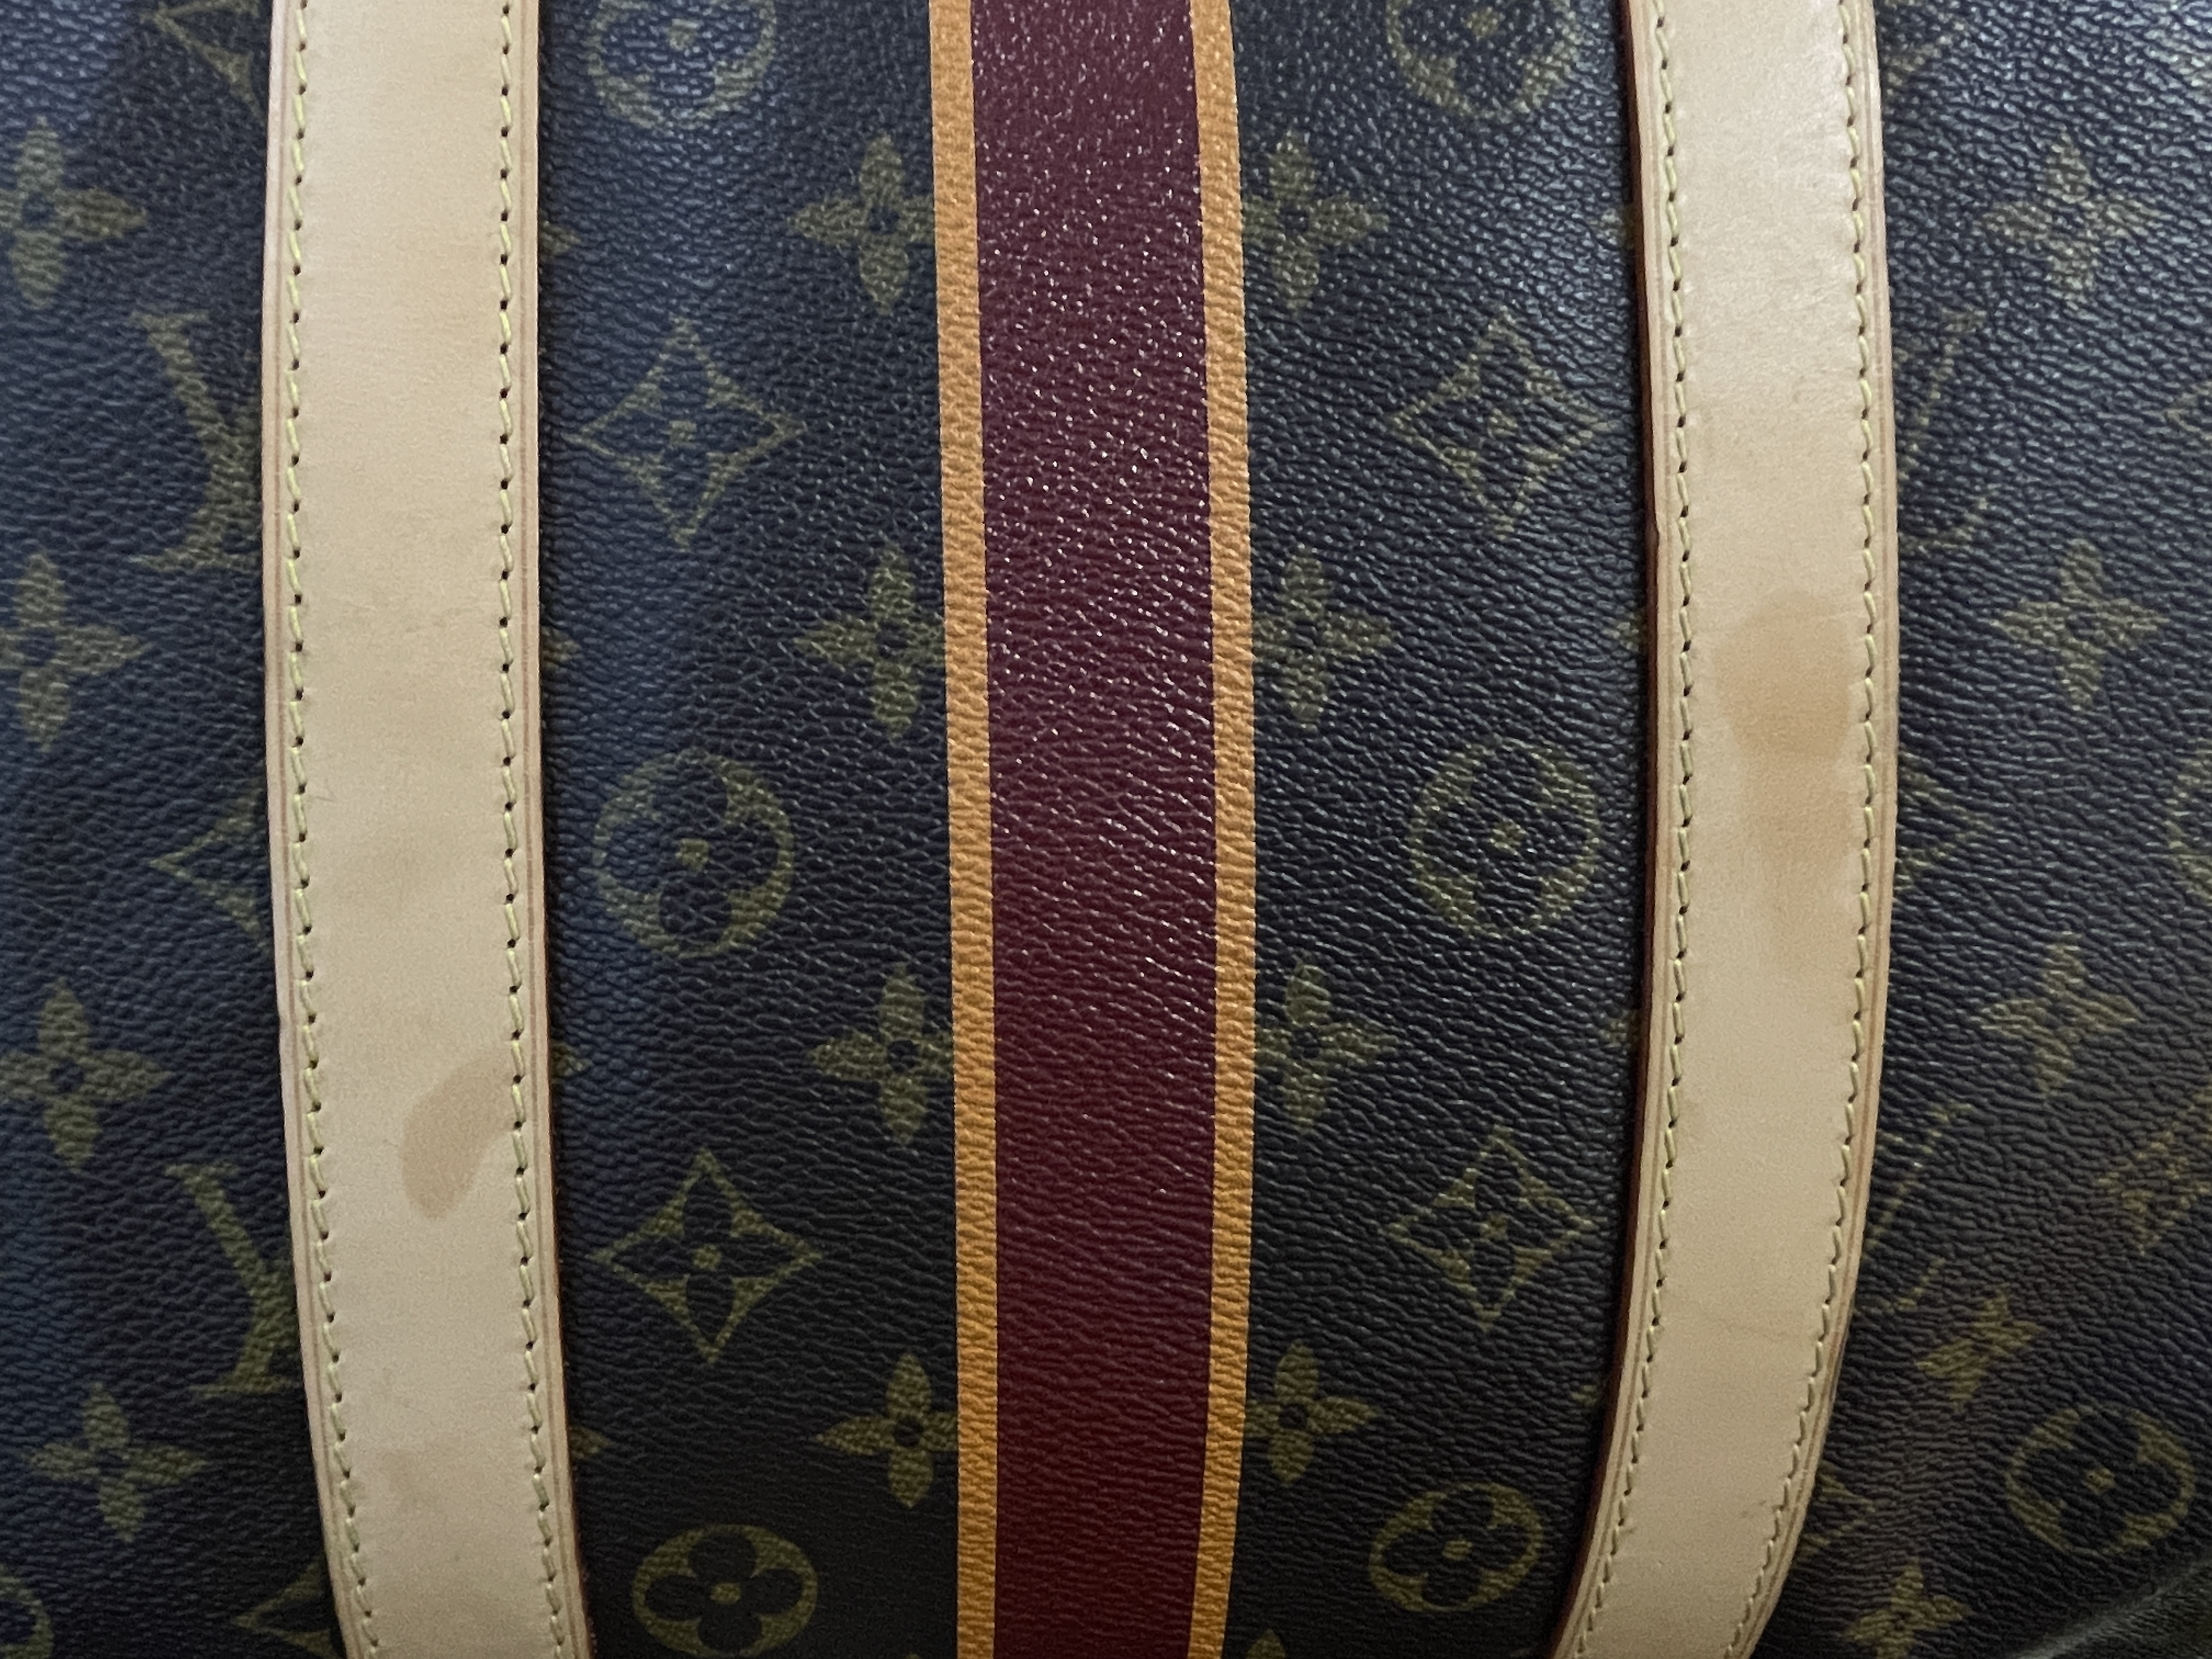 LOUIS VUITTON KEEPALL BANDOULIERE - Image 10 of 10